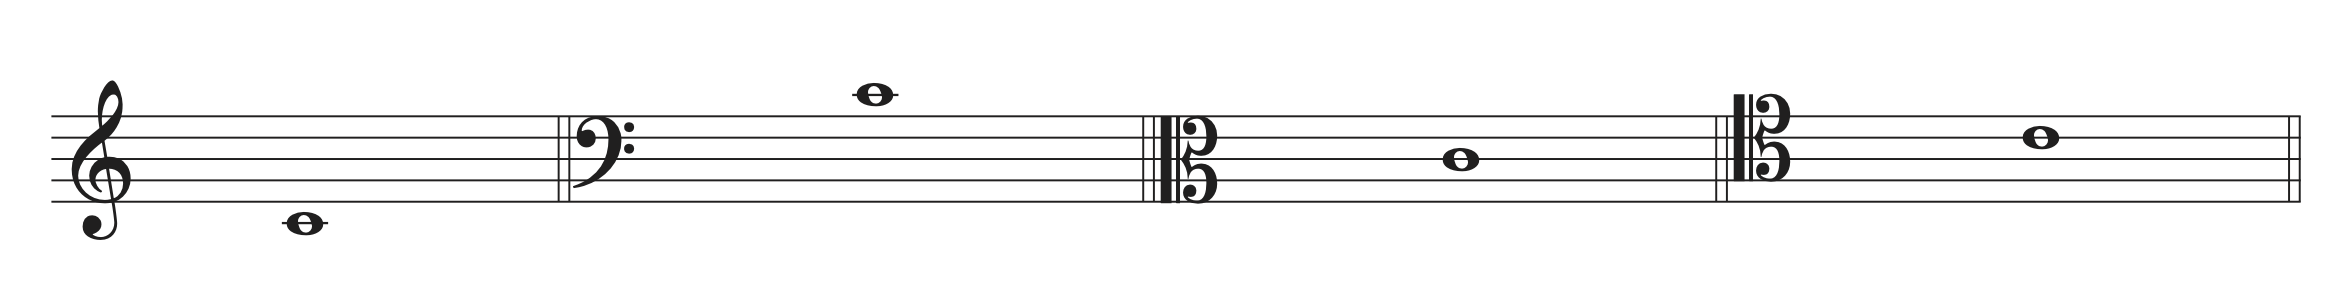 Middle C drawn in treble, bass, alto, and tenor clefs on a staff.